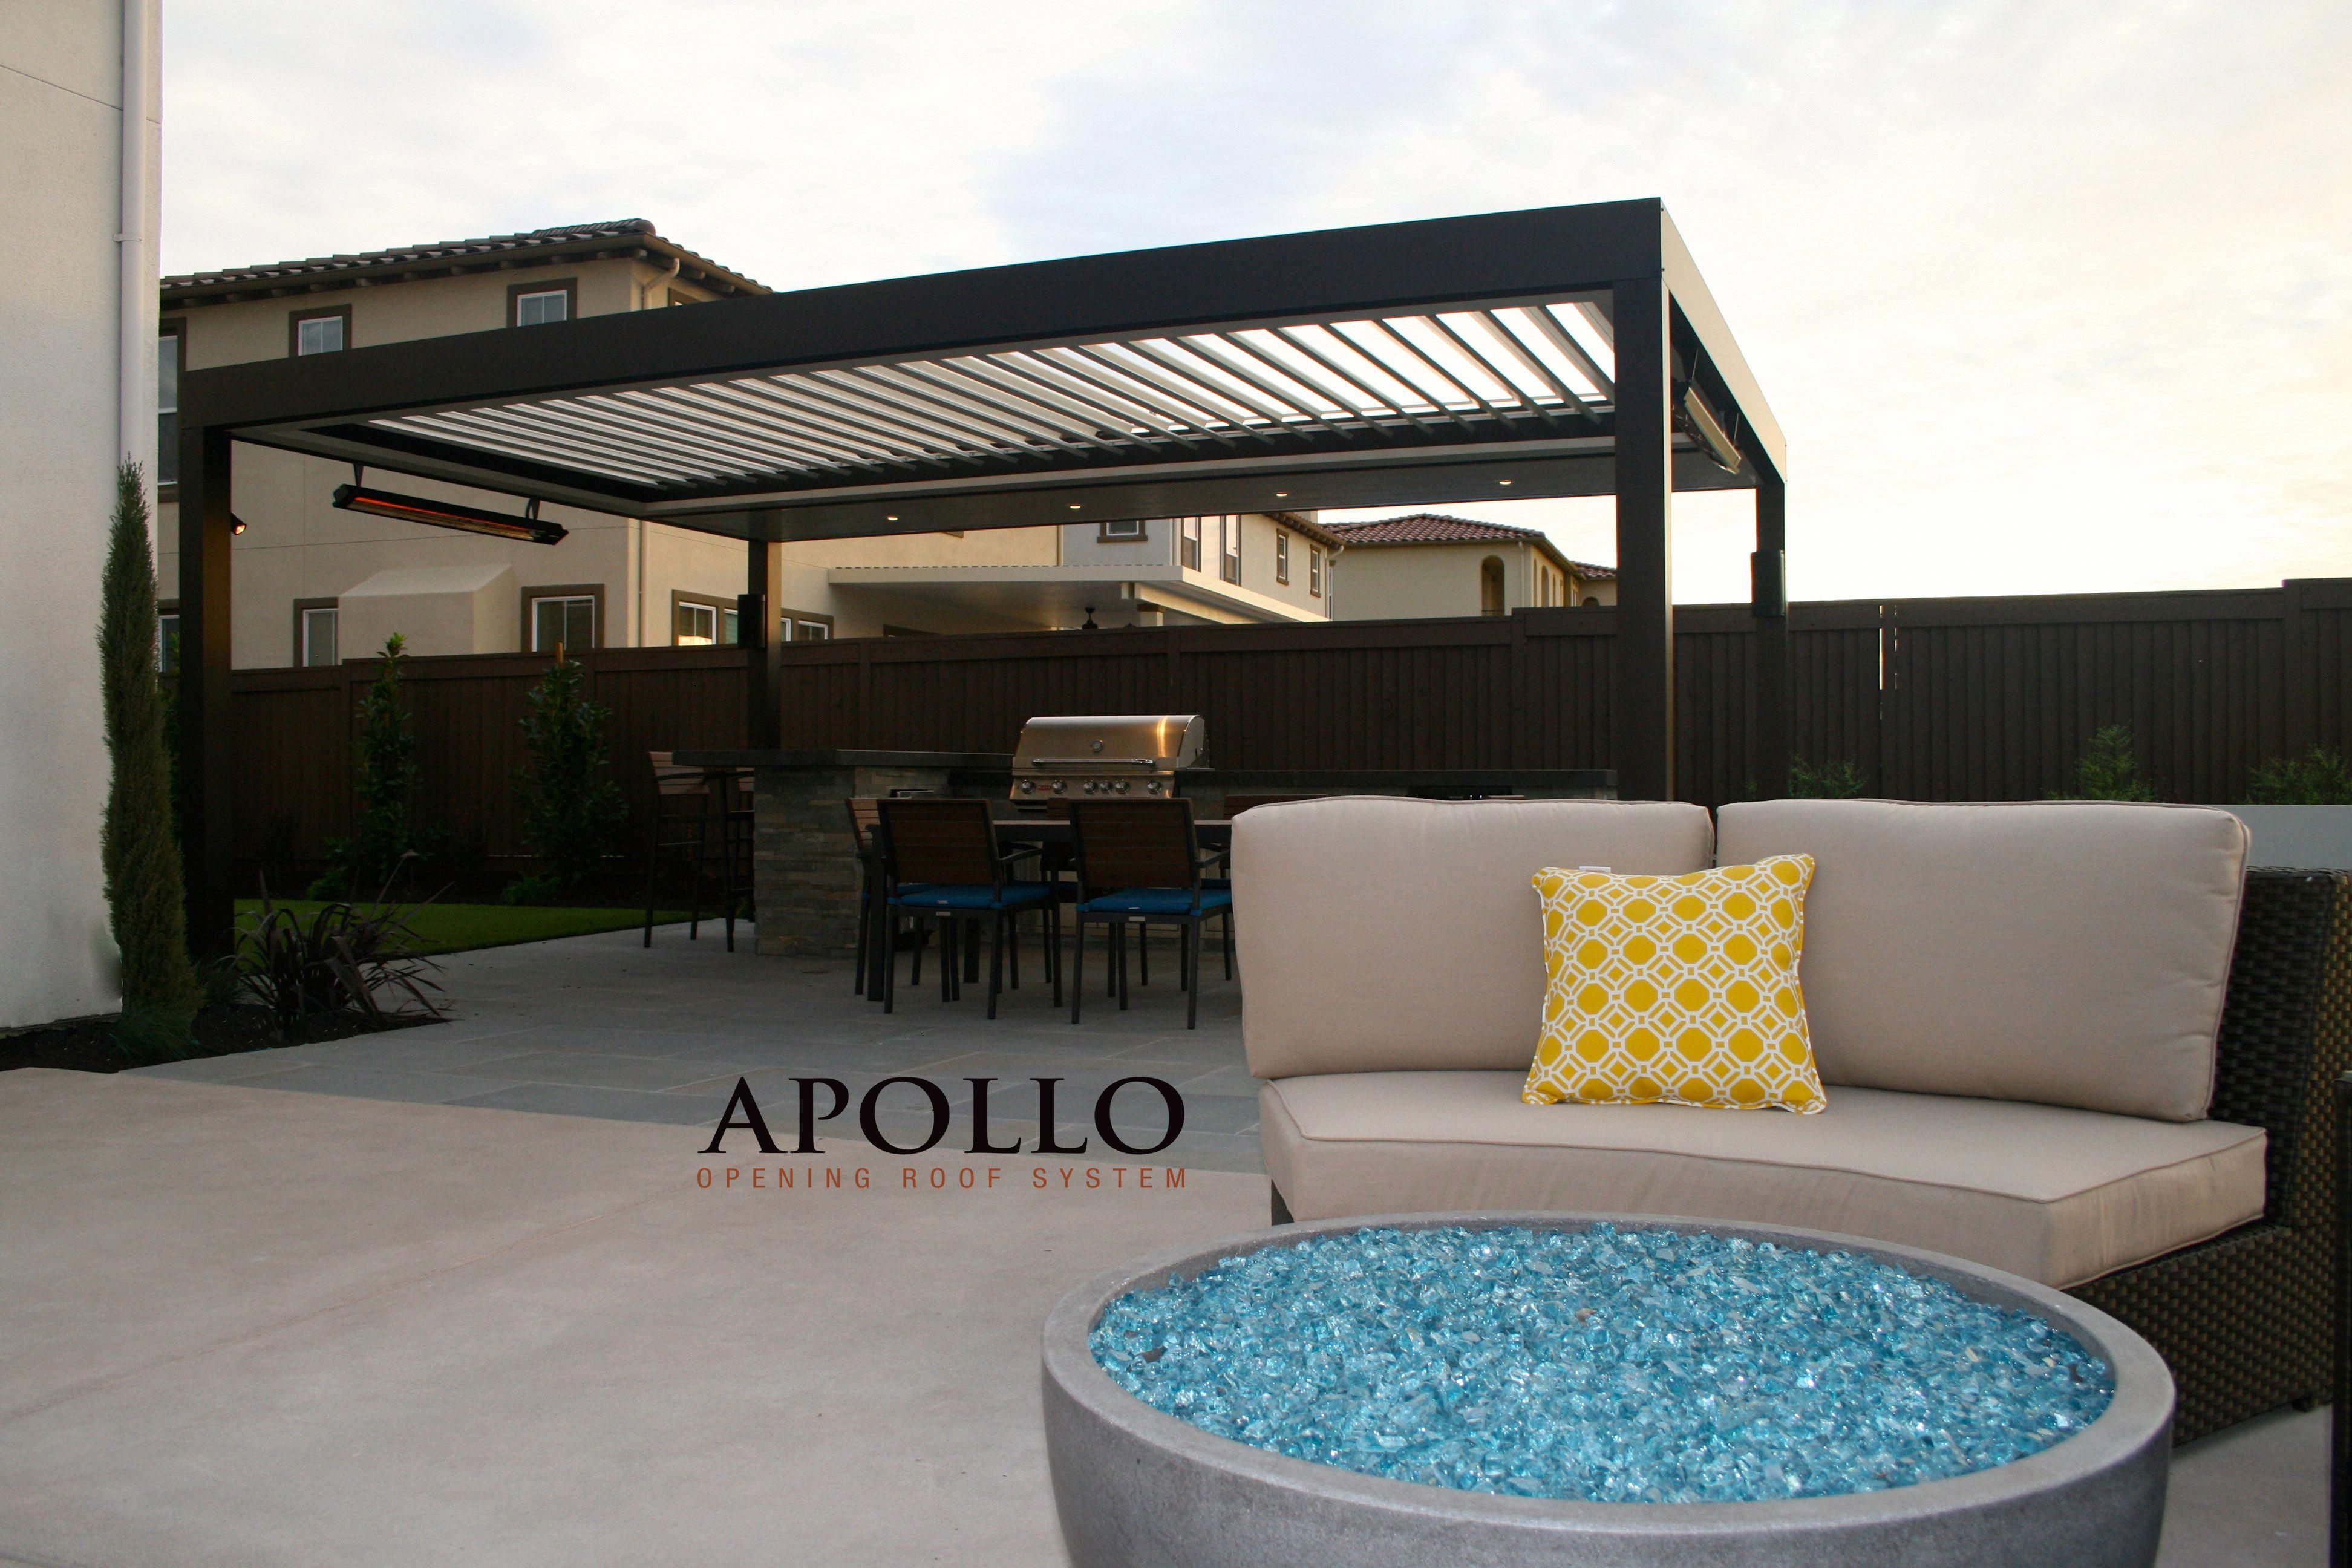 The Apollo Really Finished The Look Of This Backyard Oasis intended for proportions 3888 X 2592